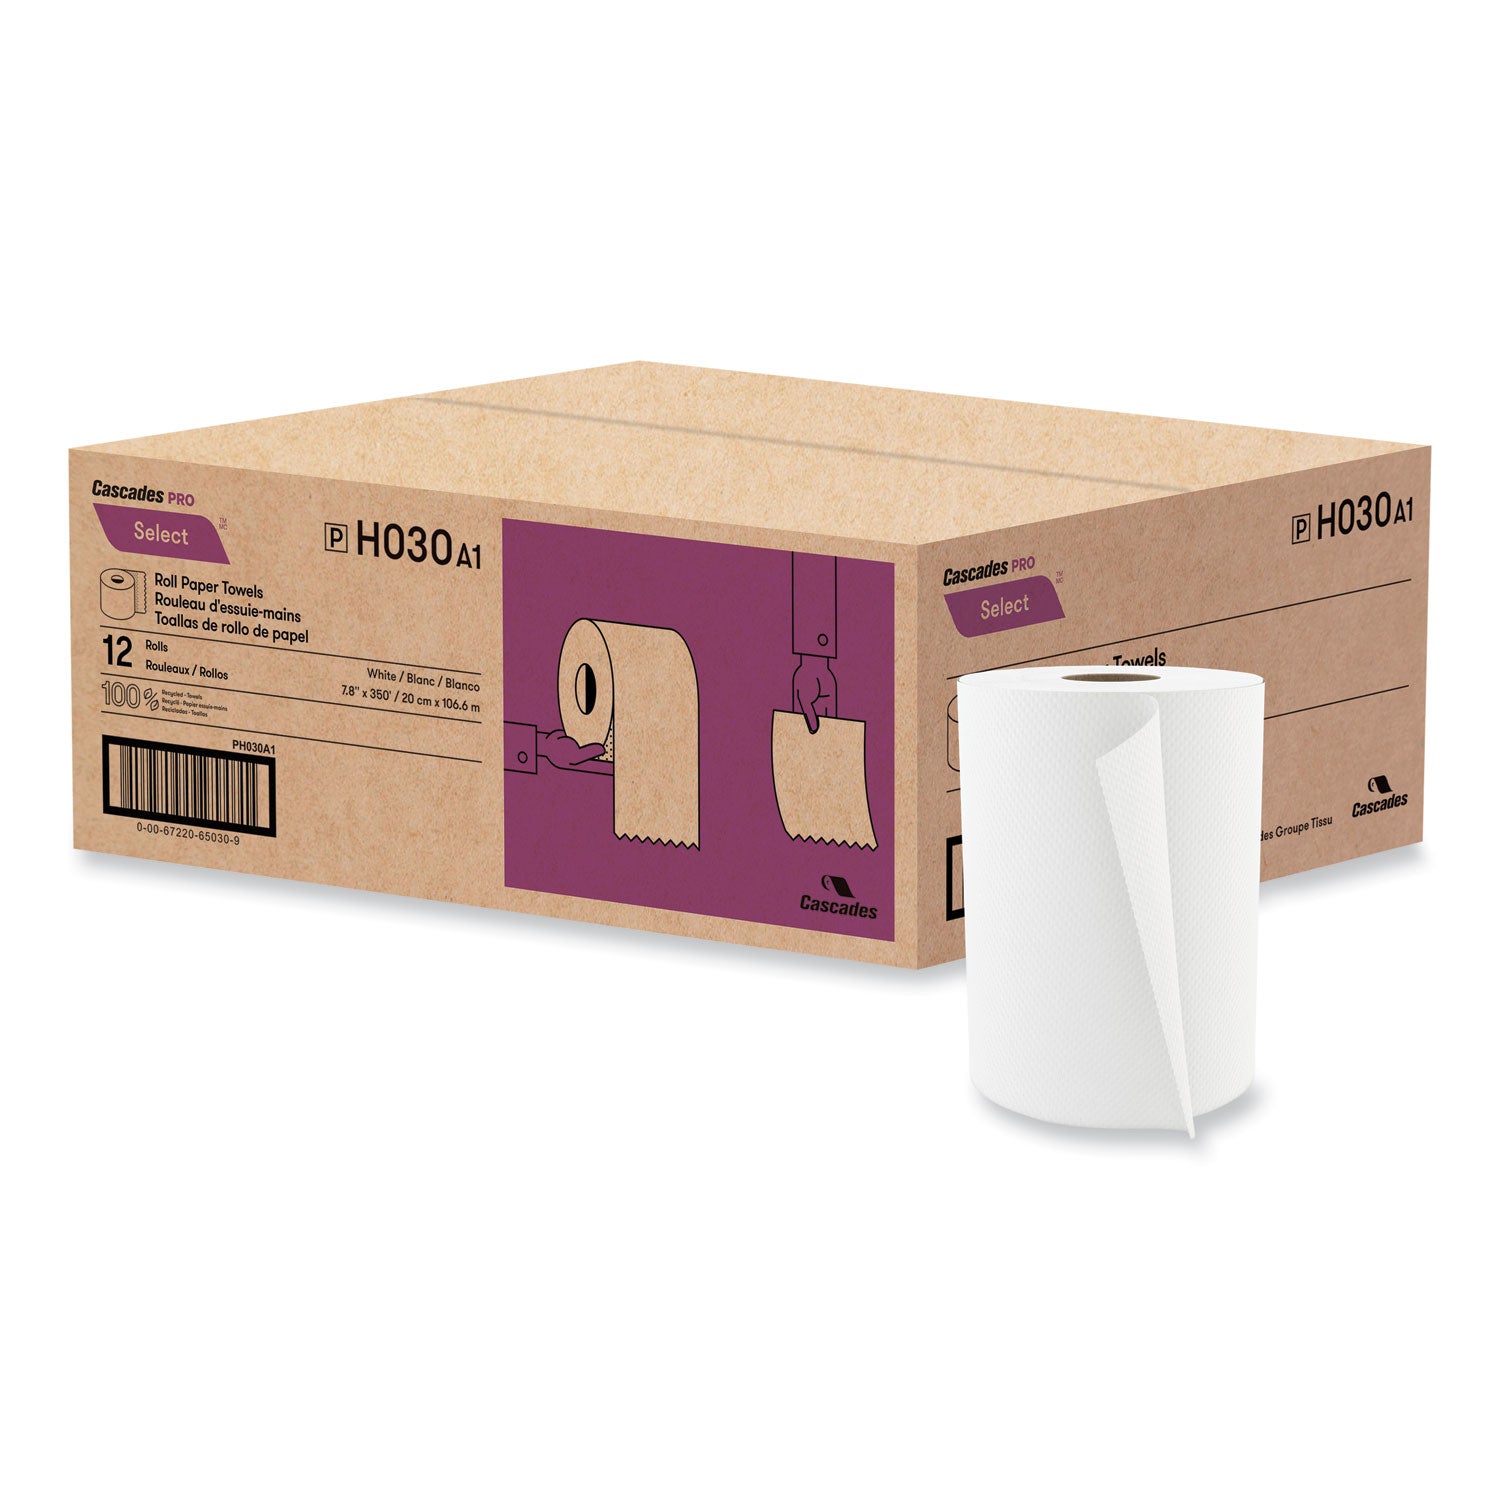 select-roll-paper-towels-1-ply-788-x-350-ft-white-12-rolls-carton_csdh030 - 3